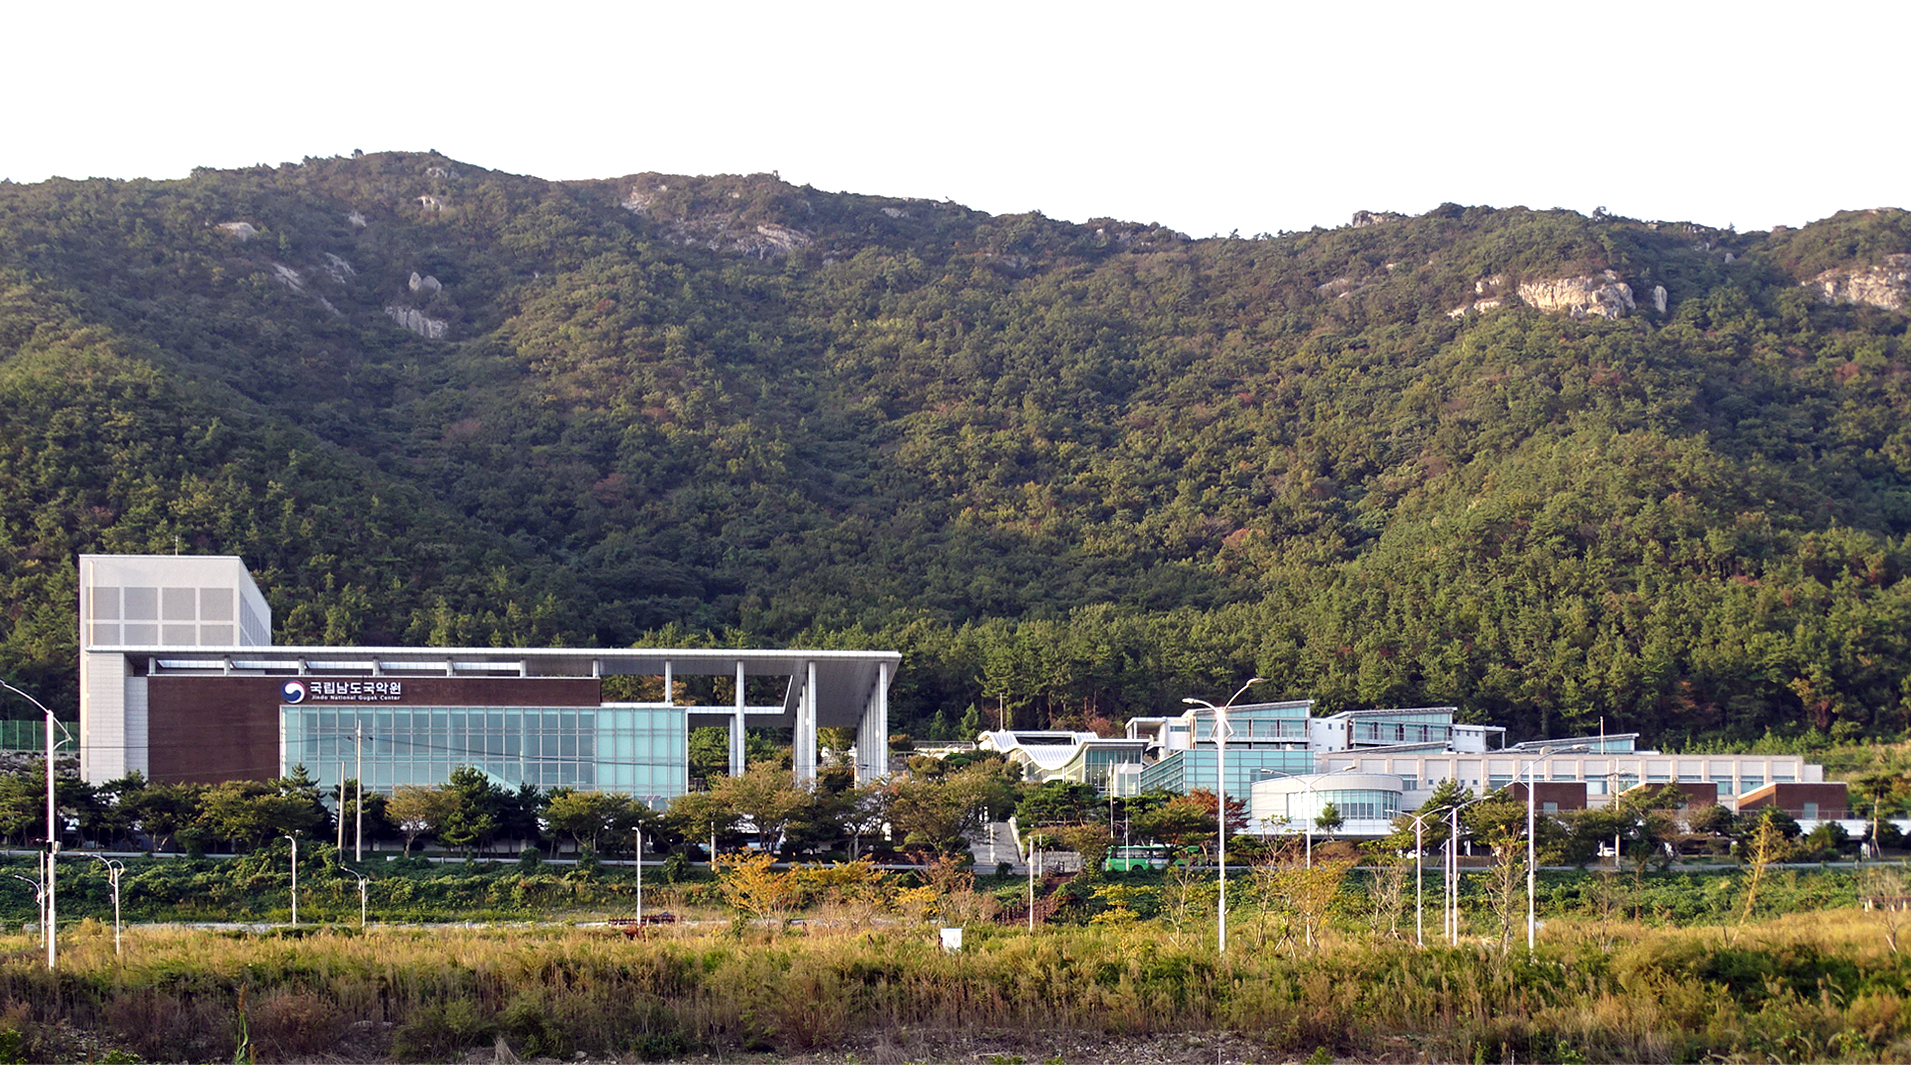 Jindo National Gugak Center located on the hillside of Yeoguisan in Sangman-ri (village), lmhoe-myeon (township), opened in July 2004, has facilities for various performance-related programs, gugak (music of Korea) training, and gugak research.